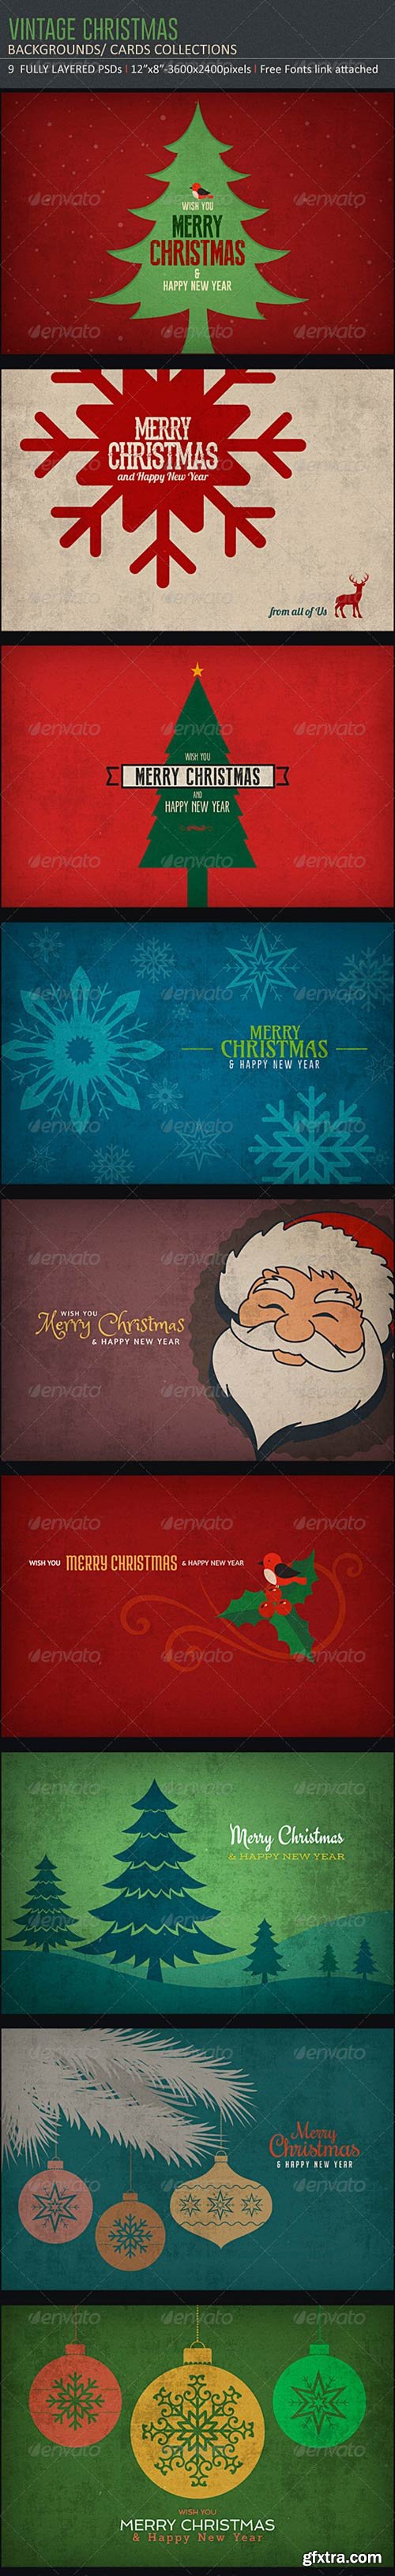 GraphicRiver - Vintage Christmas Backgrounds